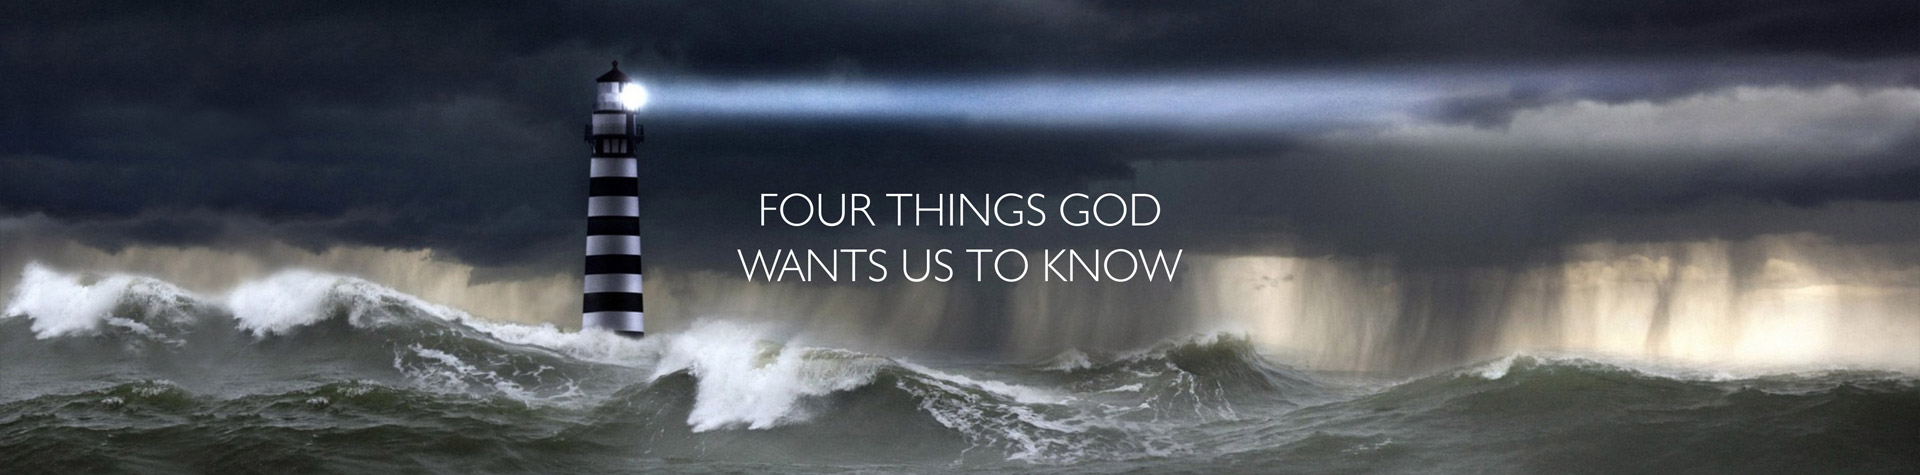 Four Things God Wants Us to Know